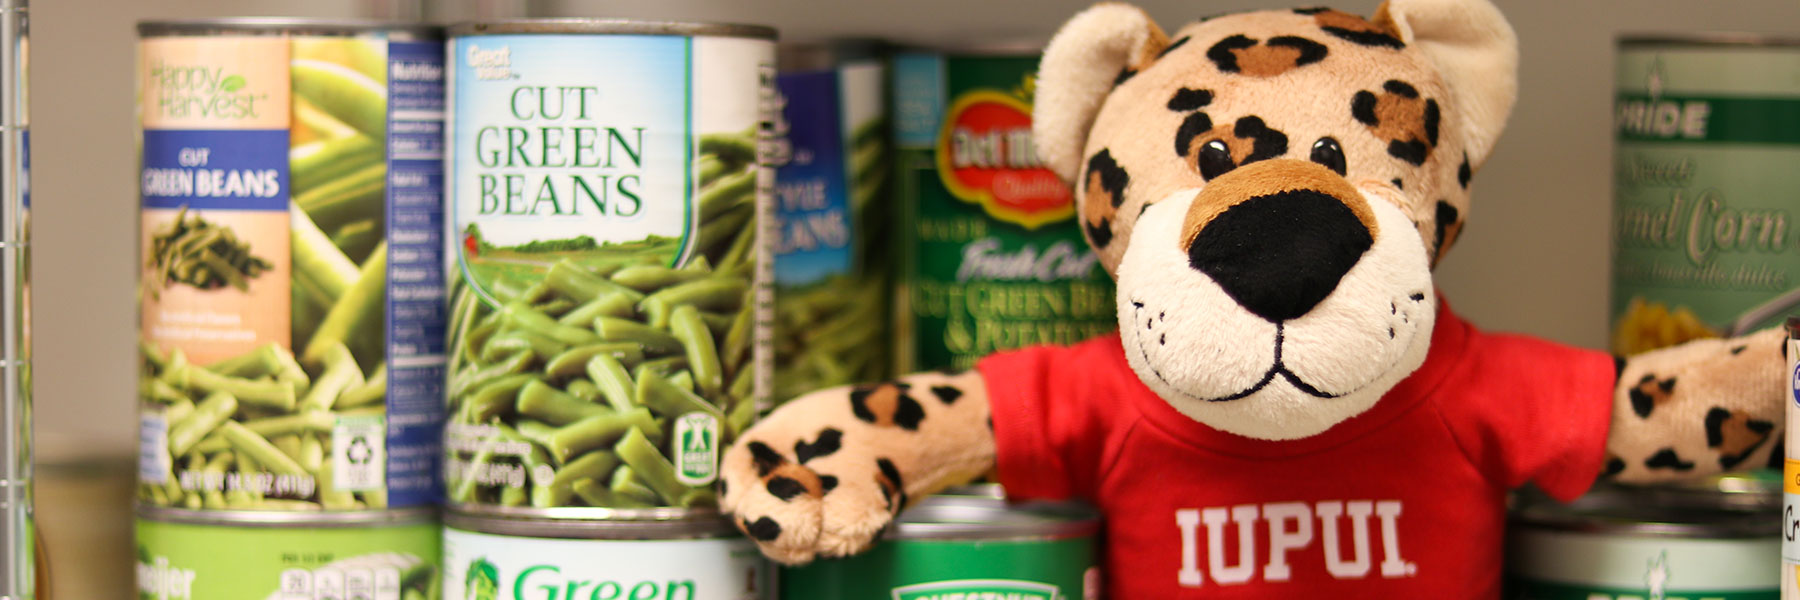 Paws sitting on a shelf in the pantry with some canned goods.